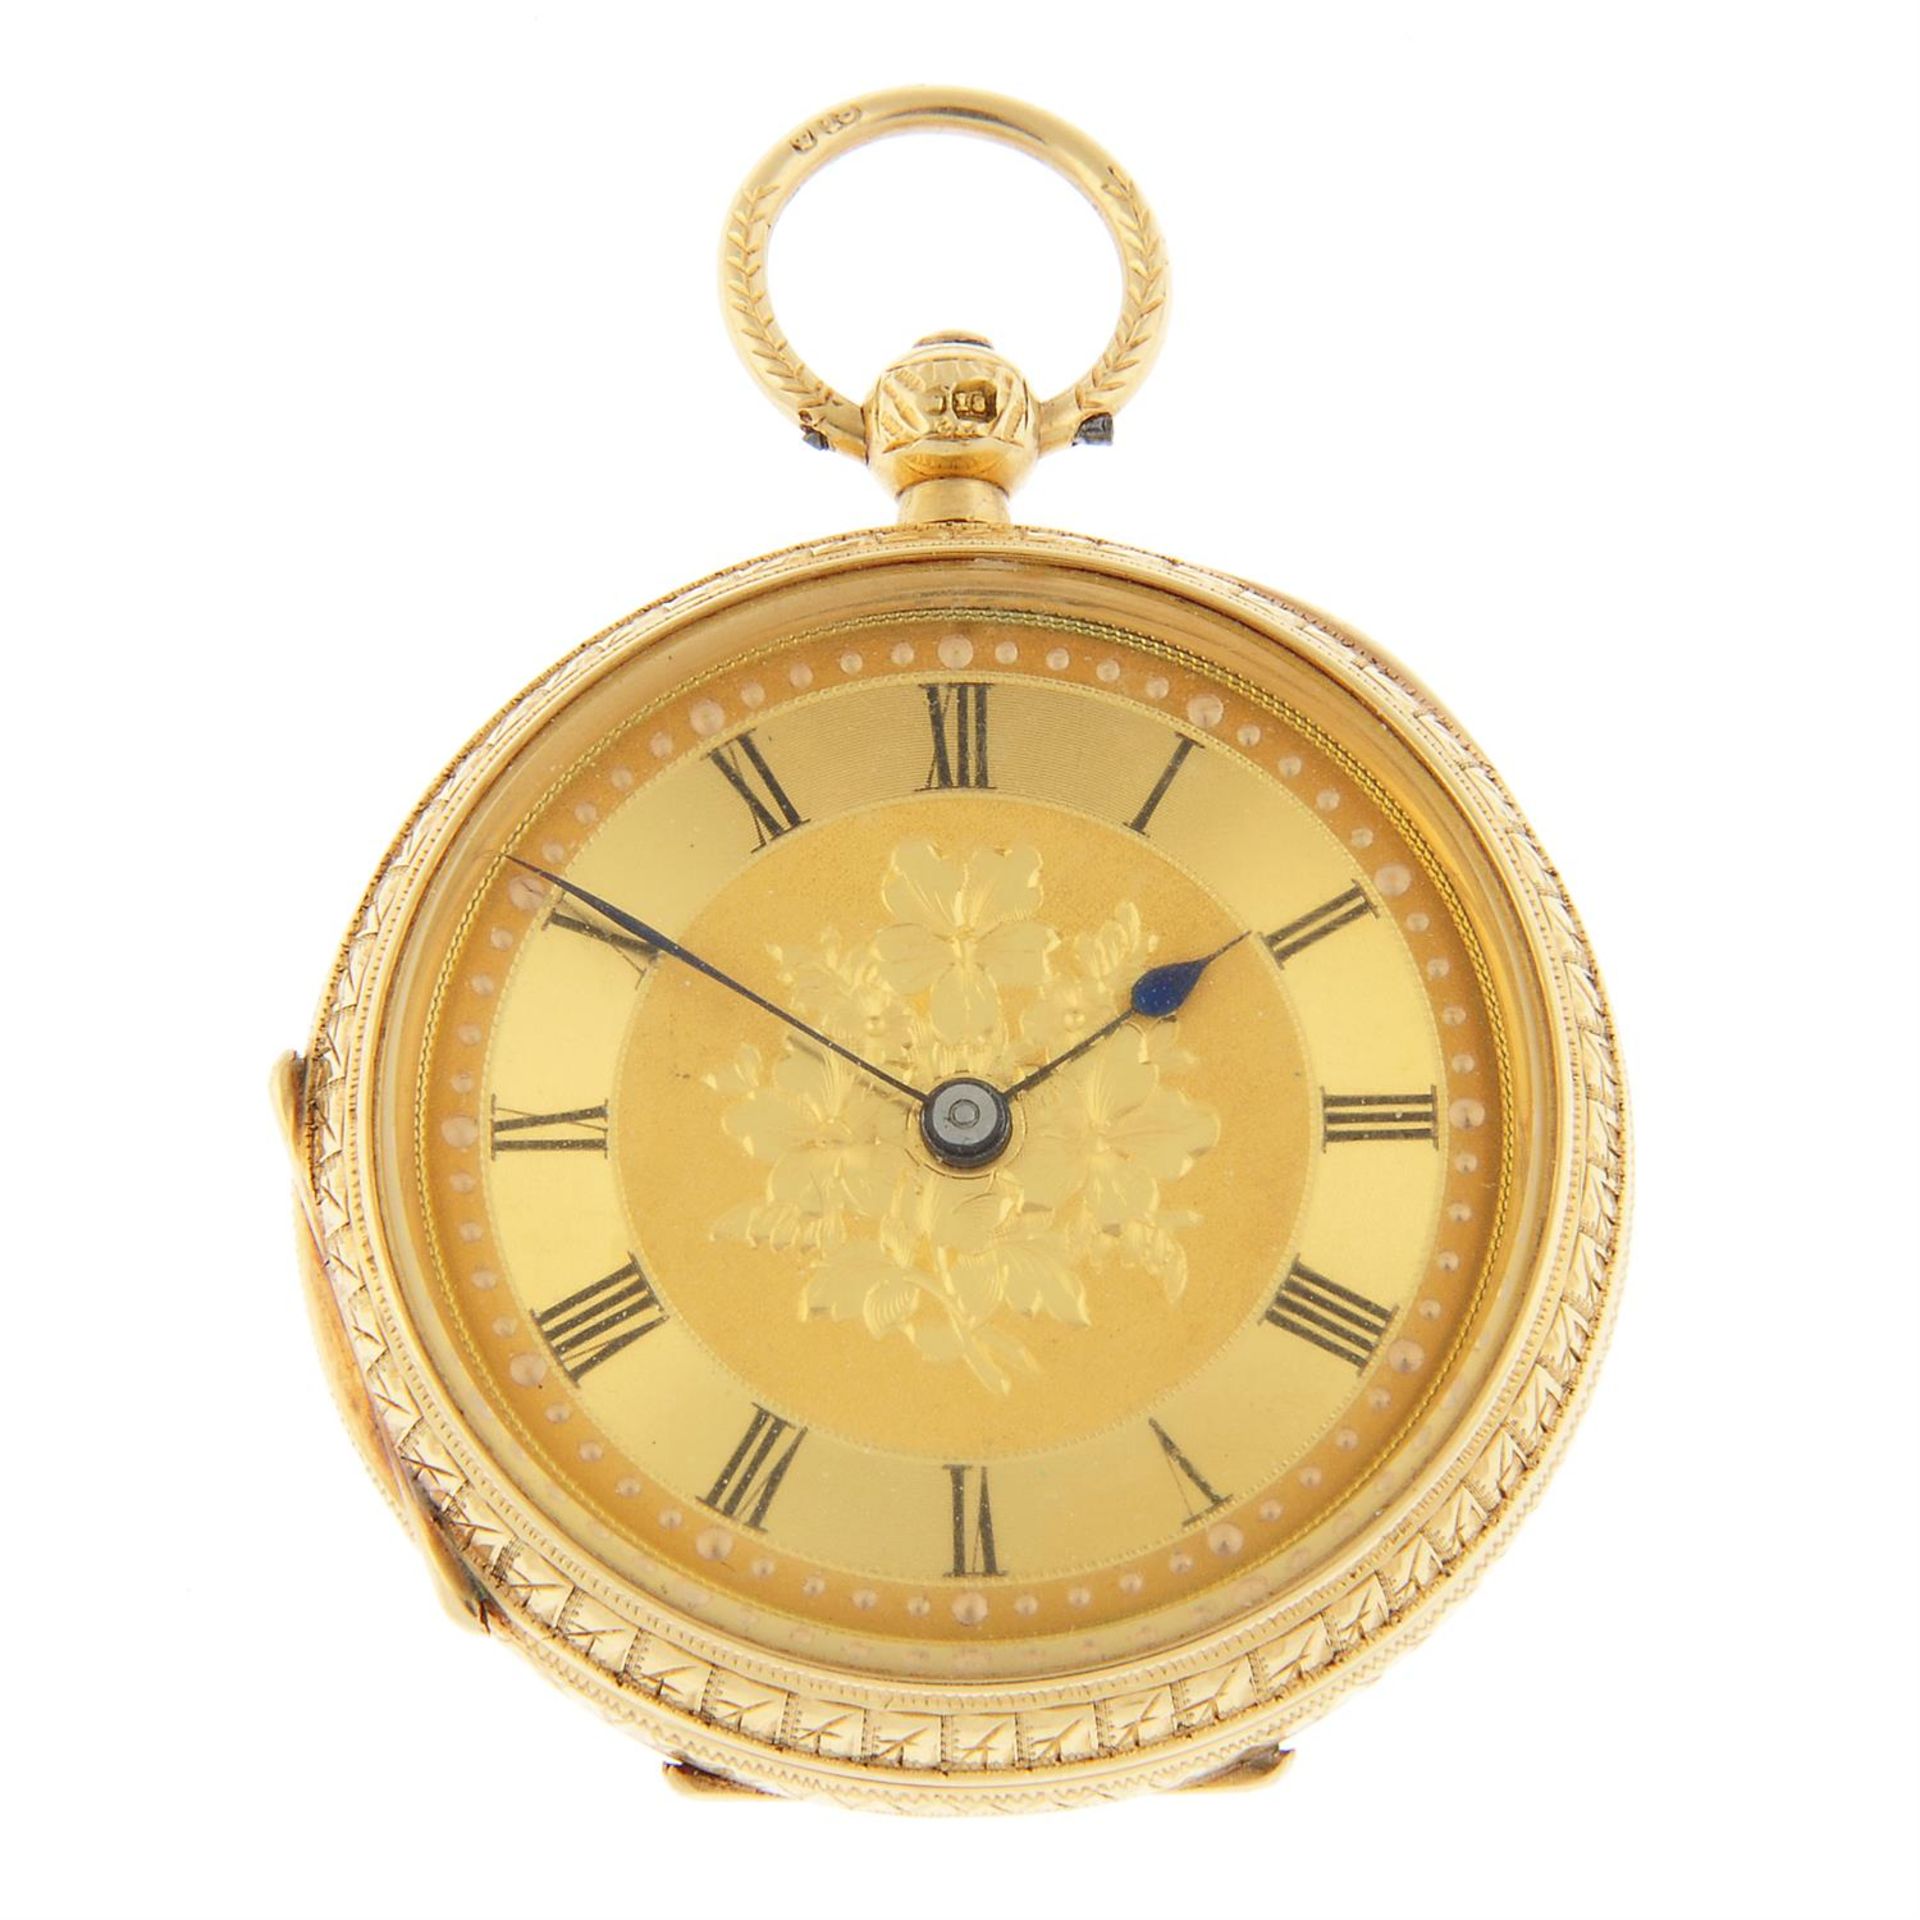 A pocket watch by C. Moody, 37mm.